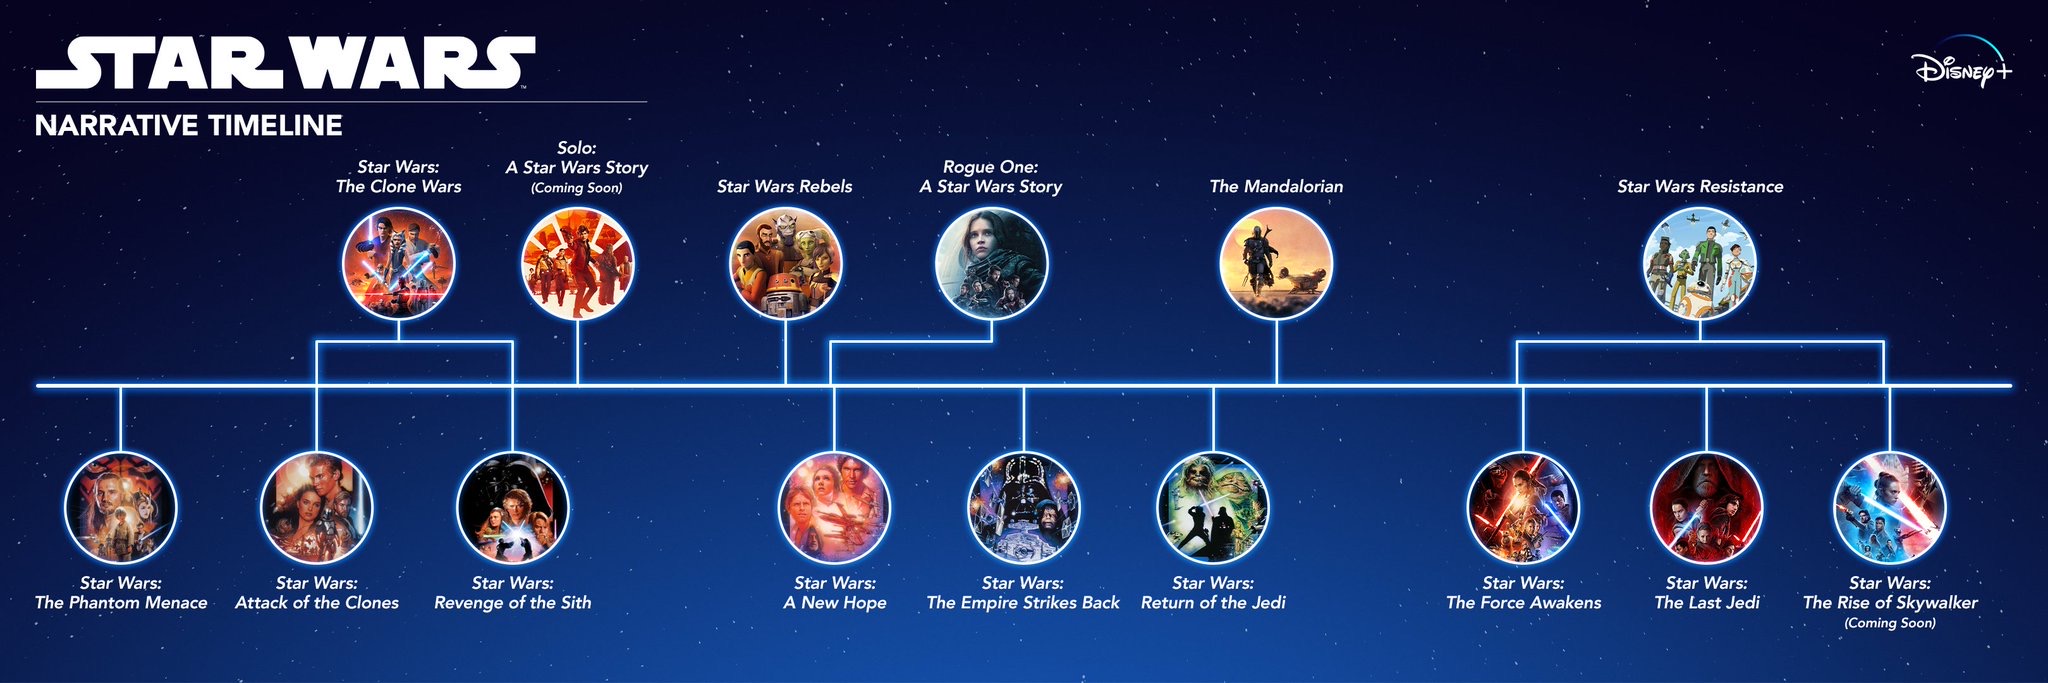 Star Wars Movies In Order Sparkly Ever After